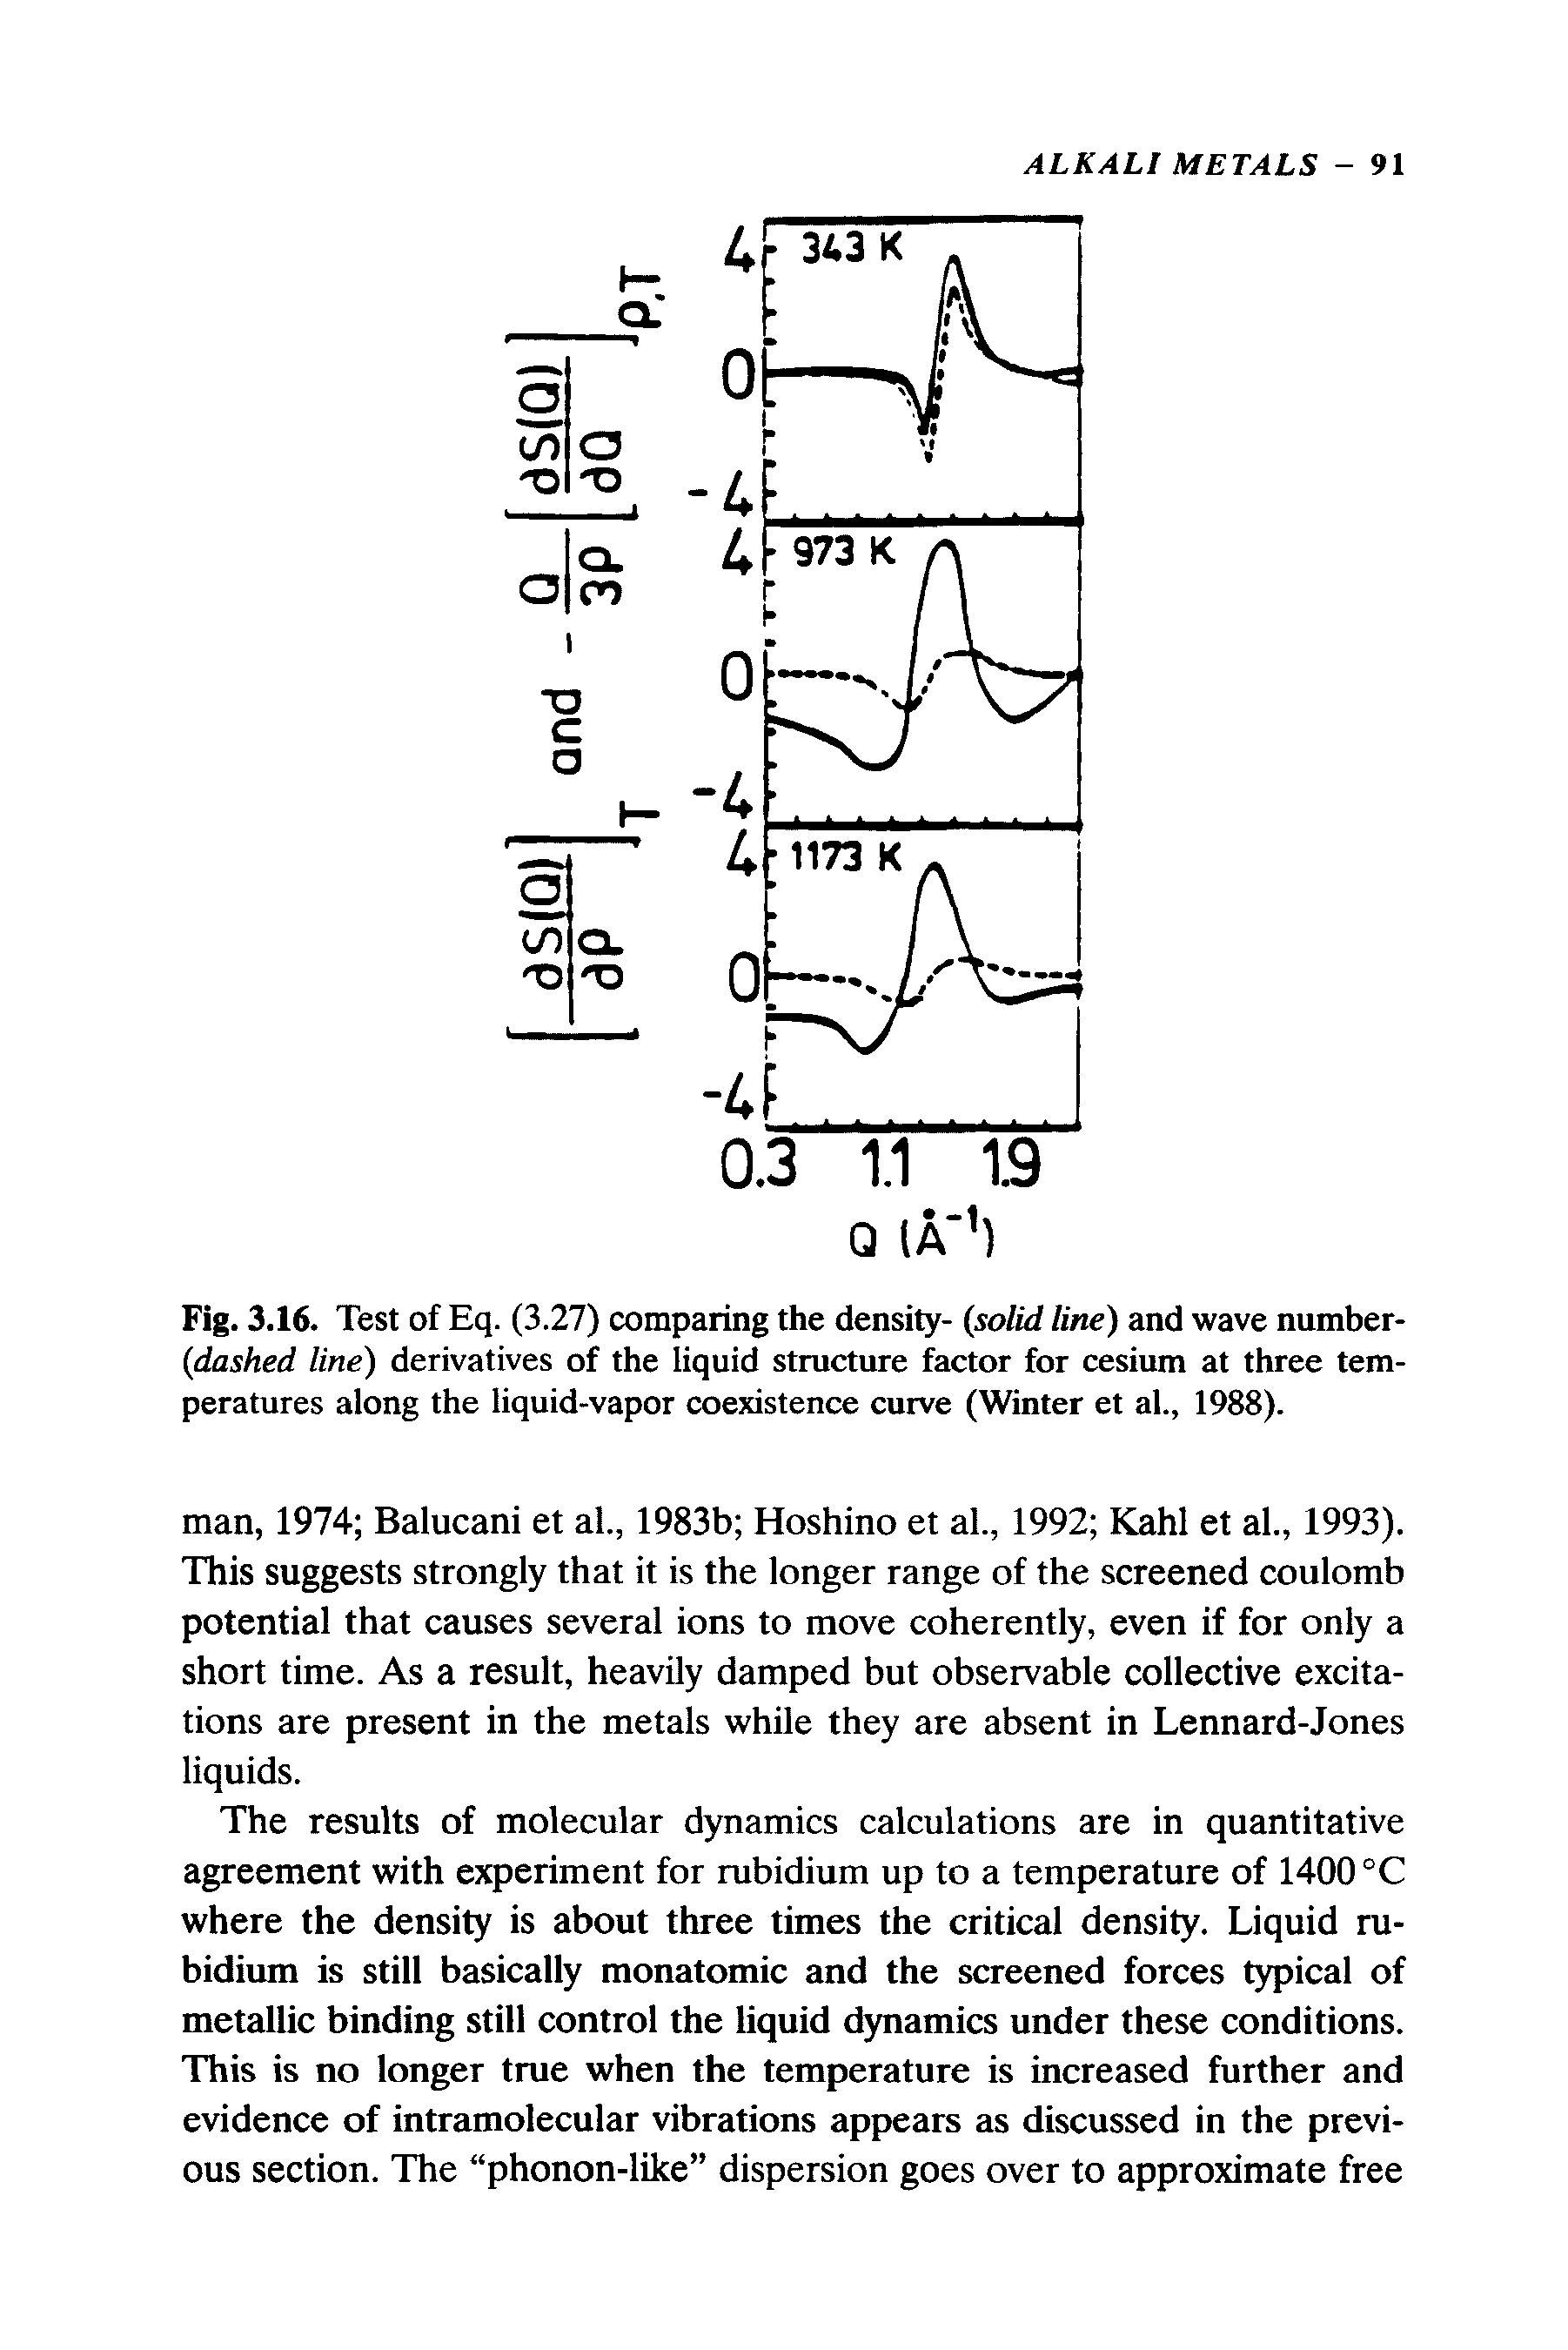 Fig. 3.16. Test of Eq. (3.27) comparing the density- solid line) and wave nnmber- dashed line) derivatives of the liquid structure factor for cesium at three temperatures along the liquid-vapor coexistence curve (Winter et al., 1988).